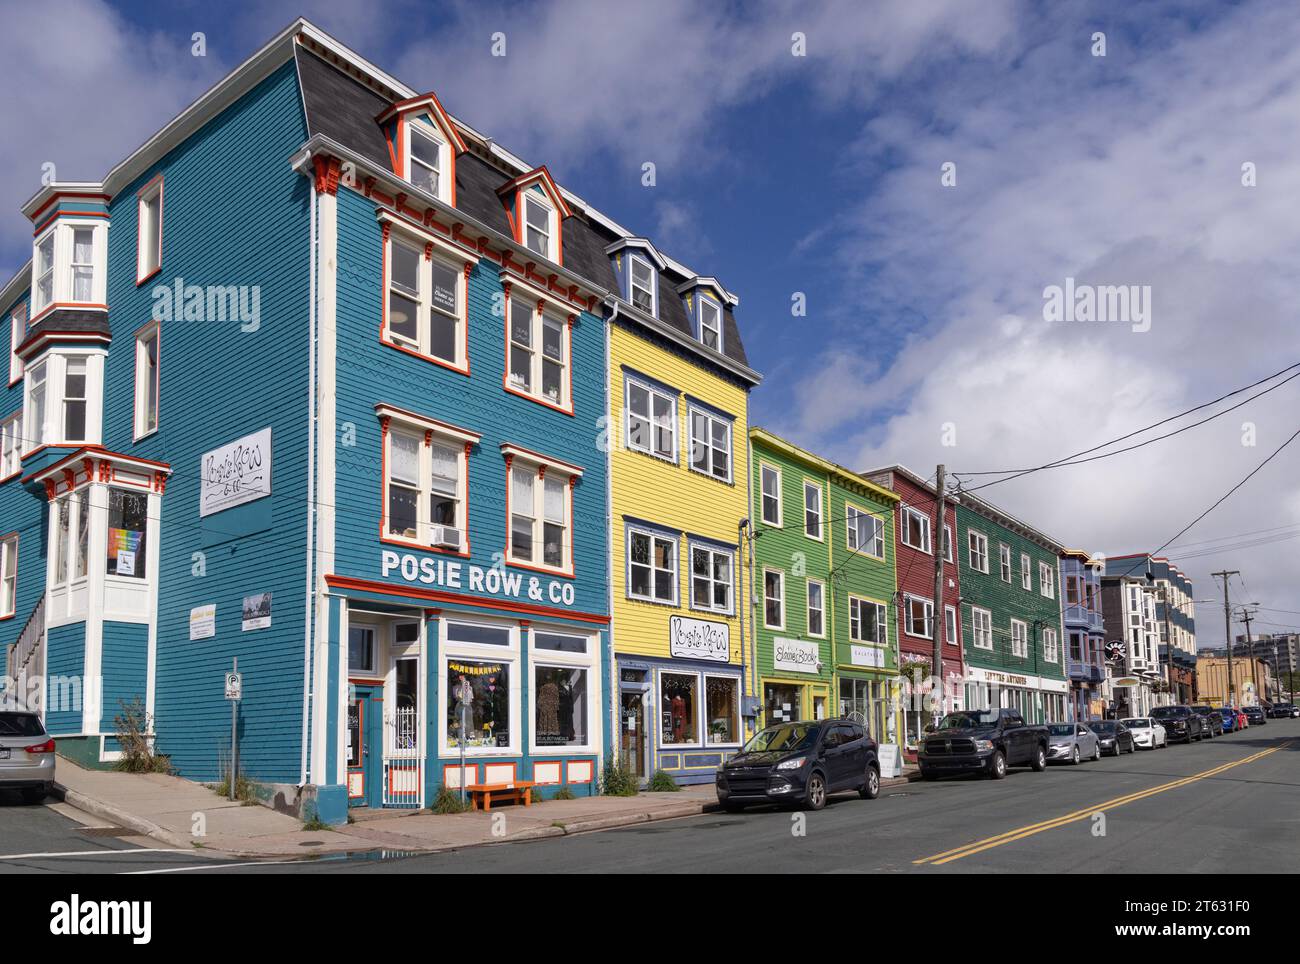 Colourful houses, or ' jelly bean ' houses, Street scene, Posie Row, Duckworth St, St Johns, Newfoundland Canada. Traditional architecture. Stock Photo